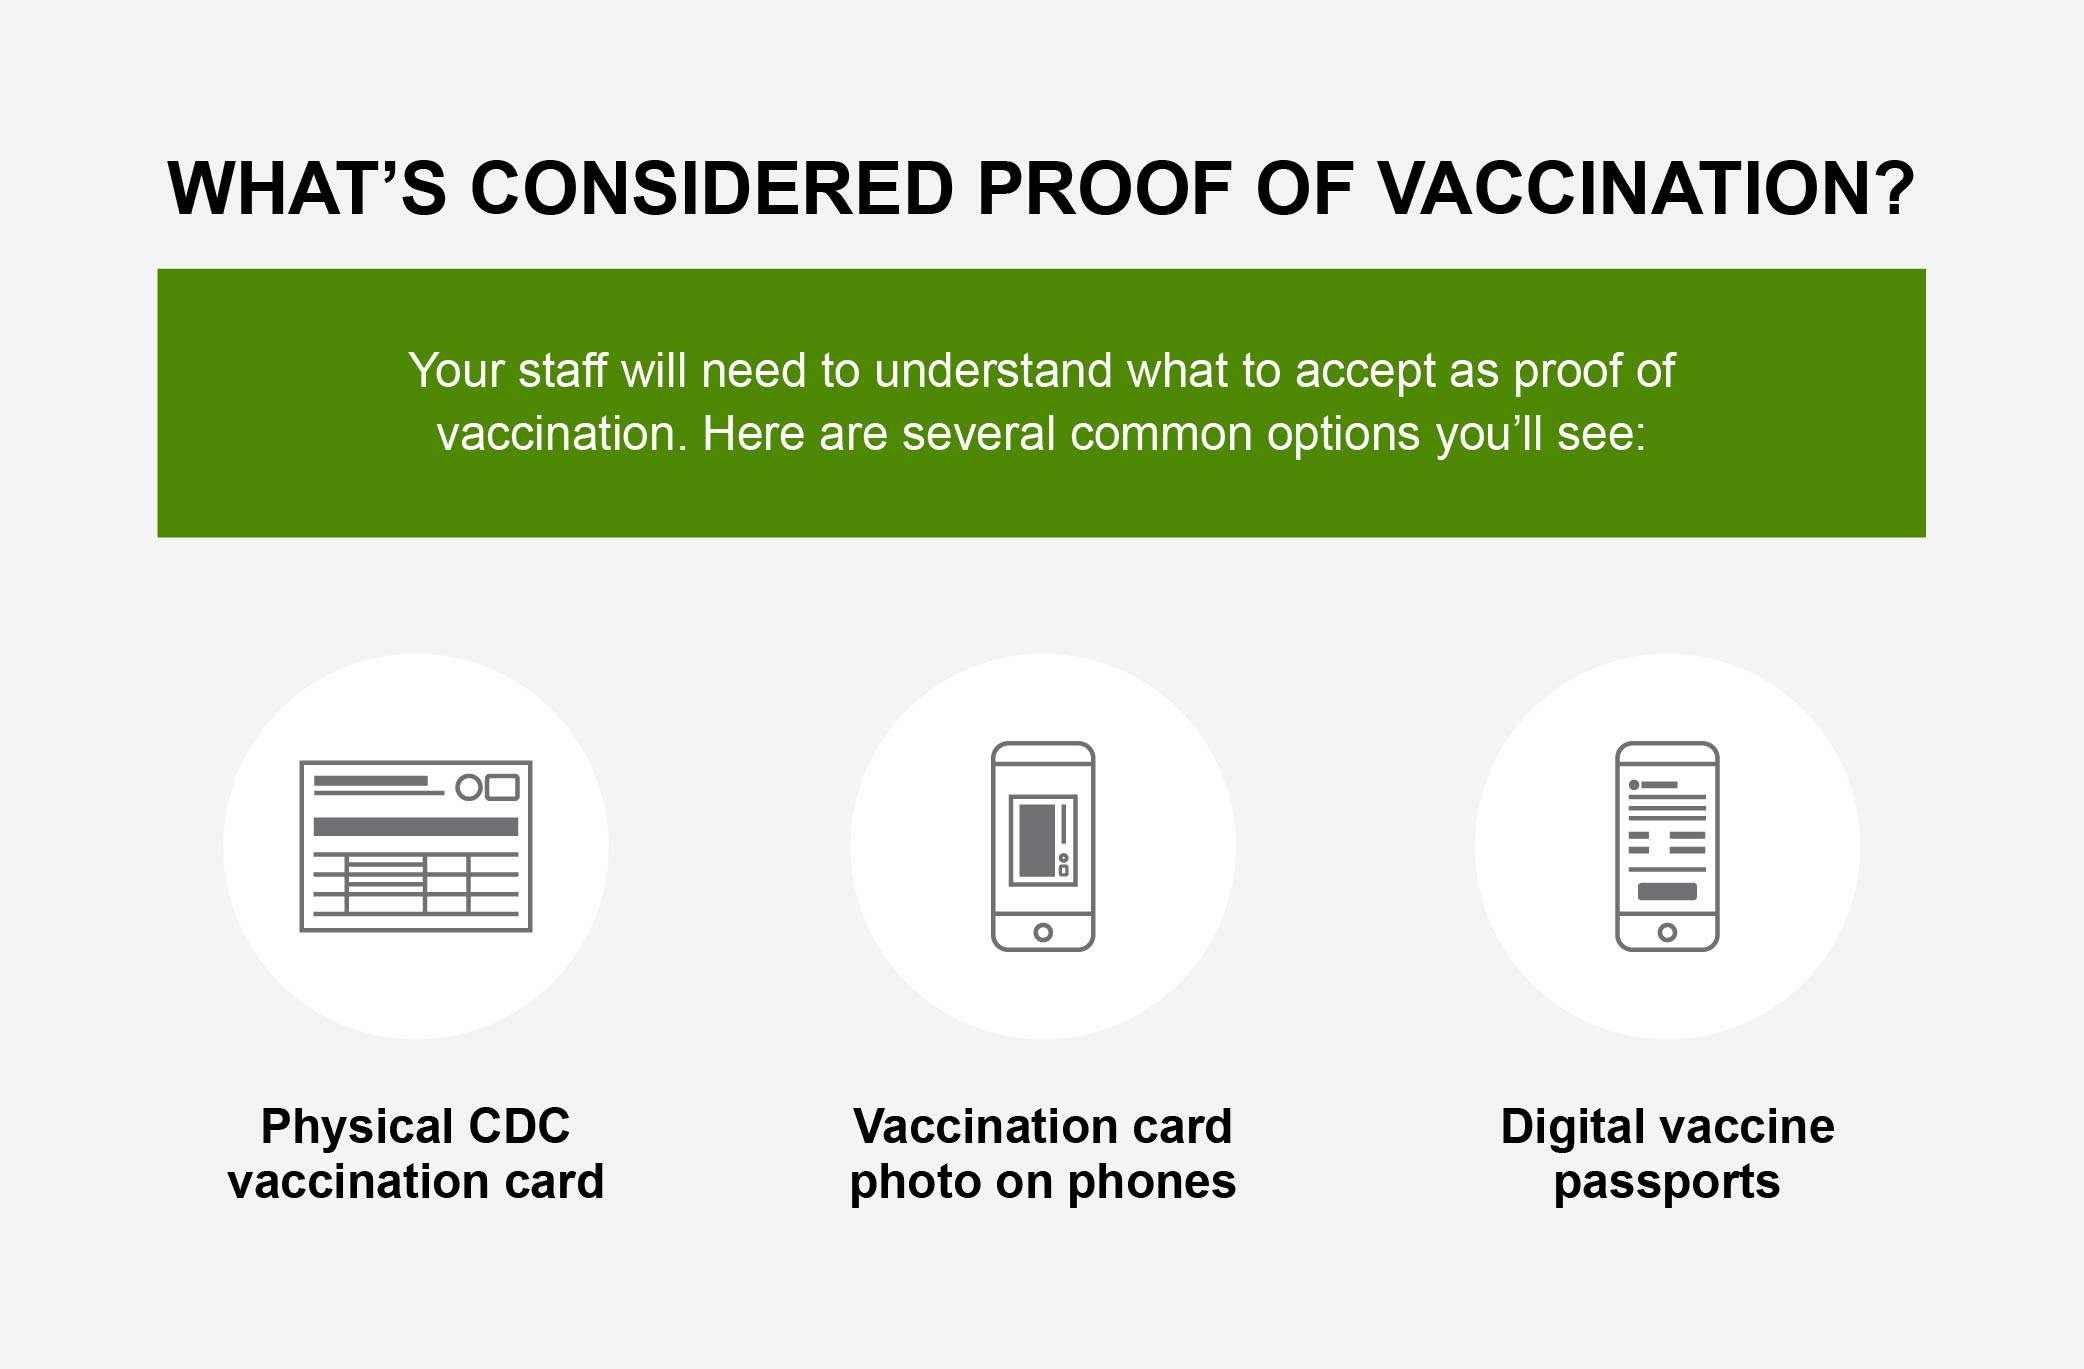 Your staff should know what to accept as proof of vaccination.